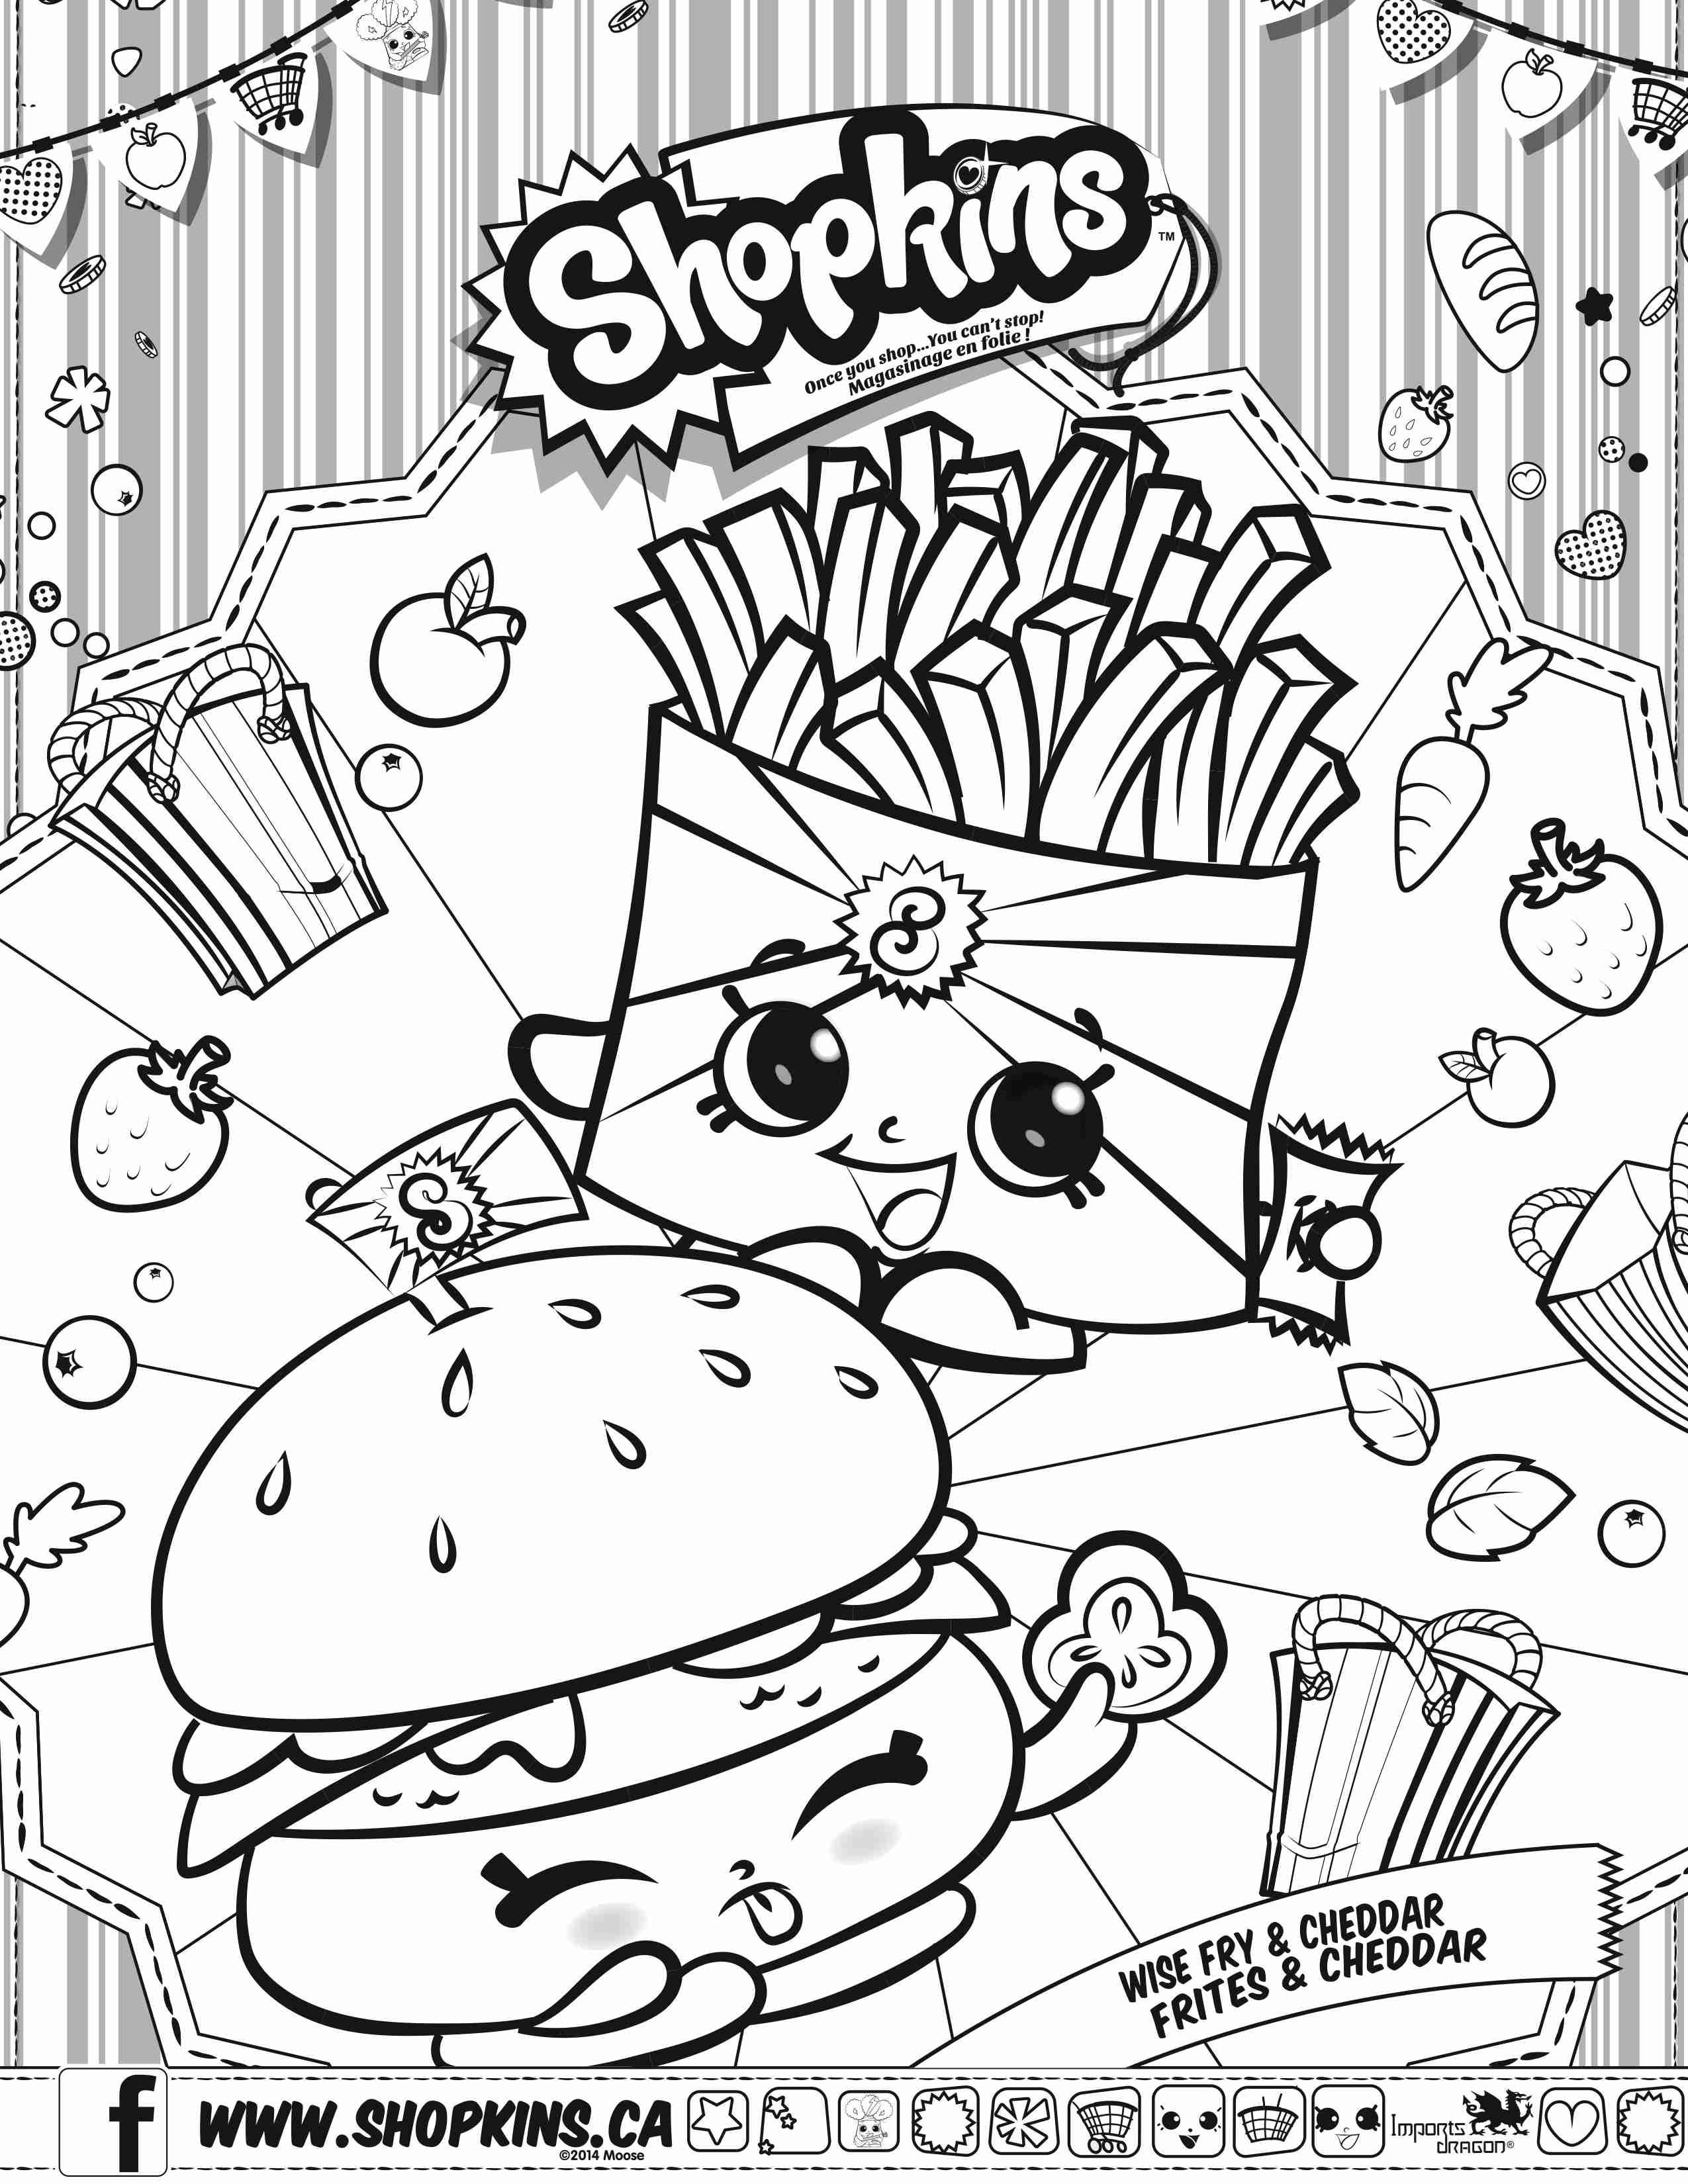 Shopkins Characters Wobbles Coloring Pages at GetDrawings Free download